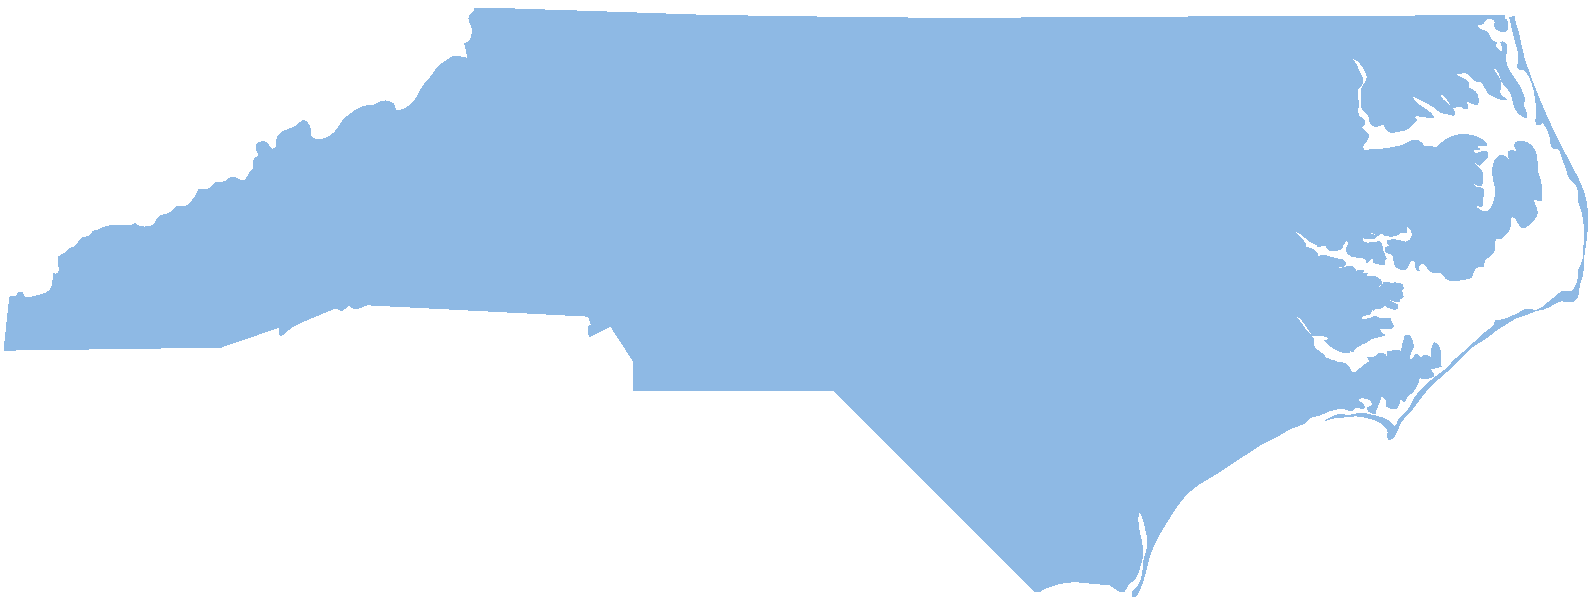 A silhouette of the state of North Carolina that is light blue